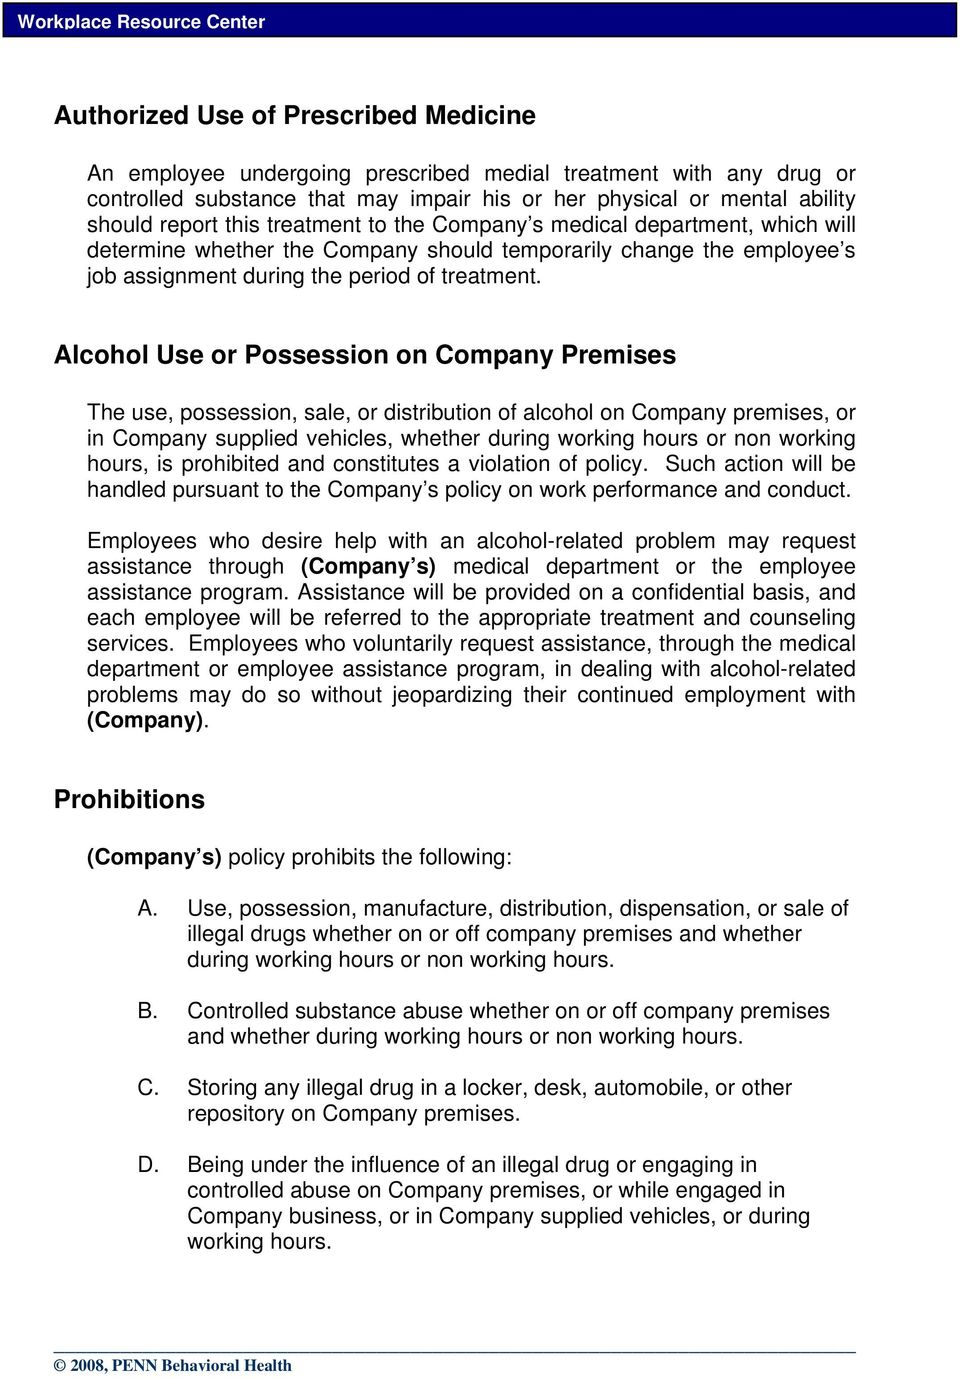 Alcohol Use or Possession on Company Premises The use, possession, sale, or distribution of alcohol on Company premises, or in Company supplied vehicles, whether during working hours or non working